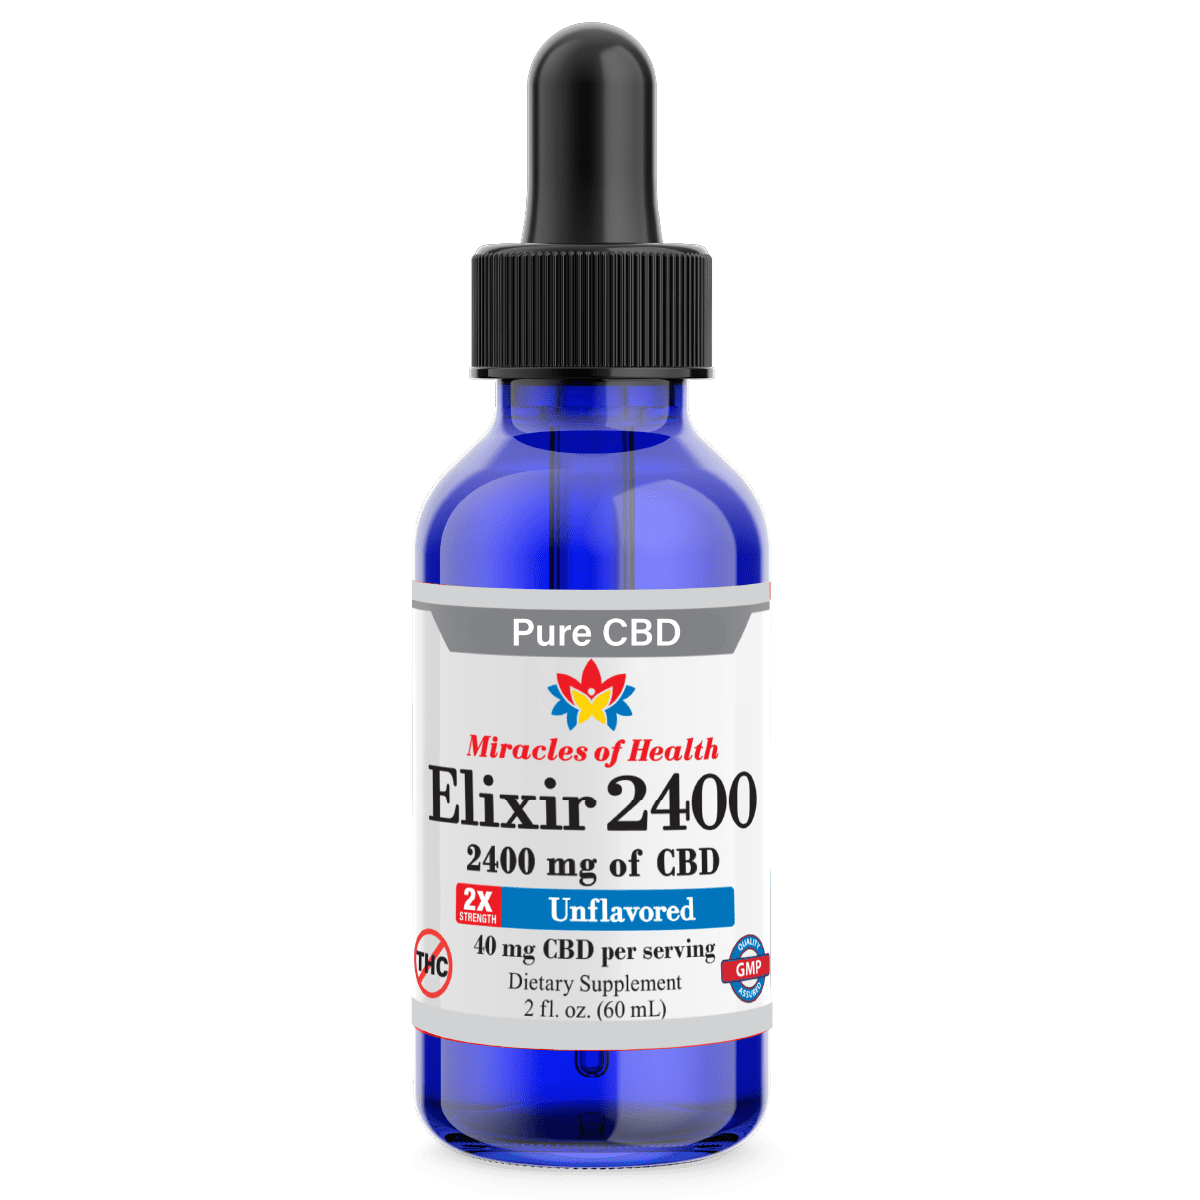 cbd for dogs london ontario, cbd for dogs leafly, cbd for dogs lakewood co, cbd for dogs langley, cbd for dog lipoma, cbd for dog liver cancer, cbd for dog leash reactivity, cbd for dog lung cancer, cbd for dog limp, cbd for large dogs, cbd oil for dogs london ontario, cbd for dogs made in usa, cbd for dogs maine, cbd for dogs miami, cbd for dogs motion sickness, cbd for dogs mn, cbd for dogs madison wi, cbd for dogs medford oregon, cbd oil for dogs michigan, cbd oil for dogs melbourne, cbd oil for dogs milwaukee, cbd oil for dogs memphis, cbd oil for dogs mississauga, cbd for dogs nausea, cbd for dogs nyc, cbd for dogs nashville, cbd for dogs nz, cbd for dogs nj, cbd for dogs north vancouver, cbd for dogs nova scotia, cbd for dogs nashville tn, cbd for pet near me, cbd for dogs sold near me, cbd for dogs overdose, cbd for dogs on amazon, cbd for dogs on chemo, cbd for dogs on 4th of july, cbd for dogs order, cbd for dogs oregon, cbd for dogs omaha, cbd for dogs orange county, cbd for dogs oakland ca, cbd for dogs okc, cbd for dogs orlando, cbd for dogs portland or, cbd treats for dogs on amazon, cbd dog oil amazon, cbd for anxiety on dogs, cbd oil dogs cancer, cbd for dogs paws, cbd for dogs pet releaf, cbd for dogs portland, cbd for dogs purchase, cbd for dogs pros and cons, cbd for dogs portland oregon, cbd for dogs pain reddit, cbd for dogs pittsburgh, cbd for dogs phoenix, cbd for dogs pets at home, cbd for dogs purfurred, cbd for dog pancreatitis, cbd for pregnant dogs, cbd for dogs joint pain, cbd treats for dogs petsmart, best cbd for dogs pain, quality cbd for dogs, high quality cbd for dogs, best quality cbd for dogs, highest quality cbd for dogs, good quality cbd for dogs, calm and quiet cbd for dogs, cbd for dogs retail, cbd for dogs riverside ca, cbd for dogs reno nv, cbd for dogs rochester ny, cbd for dogs red deer, cbd for dogs reno, cbd for dogs ratings, cbd for dogs regina, cbd for dogs reaction, cbd for dogs releaf, cbd for reactive dogs, cbd for pet rats, cbd treats for dogs reviews, cbd dose for dogs reddit, cbd chews for dogs reviews, cbd for dogs same as humans, cbd for dogs store, cbd for dogs sleep, cbd for dogs scared of thunder, cbd for dogs store near me, cbd for dogs sprouts, cbd for dogs seattle, cbd for dogs spokane, cbd for dogs sacramento, cbd for dogs skin allergies, cbd for dogs san francisco, cbd for dogs san antonio, cbd for dogs safe for humans, cbd for dogs stomach, cbd for dogs st louis, cbd for dogs santa fe, cbd for dogs to sleep, cbd for dogs tincture, cbd for dogs tumor, cbd for dogs to stop barking, cbd for dogs to calm them, cbd for dogs that have anxiety, cbd for dogs texas, cbd for dogs top rated, cbd for dogs tampa, cbd for dogs testimonials, cbd for dogs tucson, cbd for dogs tacoma, cbd for dogs tulsa, cbd for dogs toronto, cbd for dogs upset stomach, cbd for dogs utah, cbd for dogs usa, cbd for dog uti, cbd treats for dogs uk, cbd capsules for dogs uk, cbd for dogs vermont, cbd for dogs vancouver wa, cbd for dogs vancouver, cbd for dogs victoria bc, cbd for dogs victoria, cbd for dogs vancouver bc, cbd for dogs vice, cbd oil for dogs vancouver bc, cbd treats for dogs vancouver, cbd oil for dogs vancouver canada, cbd for dogs with hip pain, cbd for dogs with heart problems, cbd for dogs with arthritis, cbd for dogs with ibd, cbd for dogs with ivdd, cbd for dogs with dementia, cbd for dogs wholesale, cbd for dogs with cushings disease, cbd for dogs with cushings, cbd for dogs with cataracts, cbd for dogs with kidney disease, cbd for dogs with dm, cbd for dogs with chf, cbd for dogs with torn acl, cbd for dogs with fear aggression, cbd for dogs with congestive heart failure, cbd for dogs where to get, cbd for dogs with nausea, xanax and cbd for dogs, cbd for dogs youtube, cbd for dog yeast infection, best cbd for your dog, young living cbd for dogs, zilis cbd for dogs, zen pen cbd for dogs, cbdistillery coupons, cbdistillery location, cbdistillery promo code, cbdistillery colorado, cbdistillery gummies, cbdistillery reviews, cbdistillery near me, cbdistillery jobs, cbdistillery careers, cbdistillery instagram, cbdistillery twitter, cbdistillery affiliate, cbdistillery denver co, cbdistillery times square, cbdistillery drug test, cbdistillery cbd oil, cbdistillery vape pen, cbdistillery vape, cbdistillery phone number, cbdistillery address, cbdistillery amazon, cbdistillery anxiety, cbdistillery account, cbdistillery anxiety reddit, cbdistillery australia, cbdistillery autism, cbdistillery coupon august 2019, cbdistillery refer a friend, cbdistillery